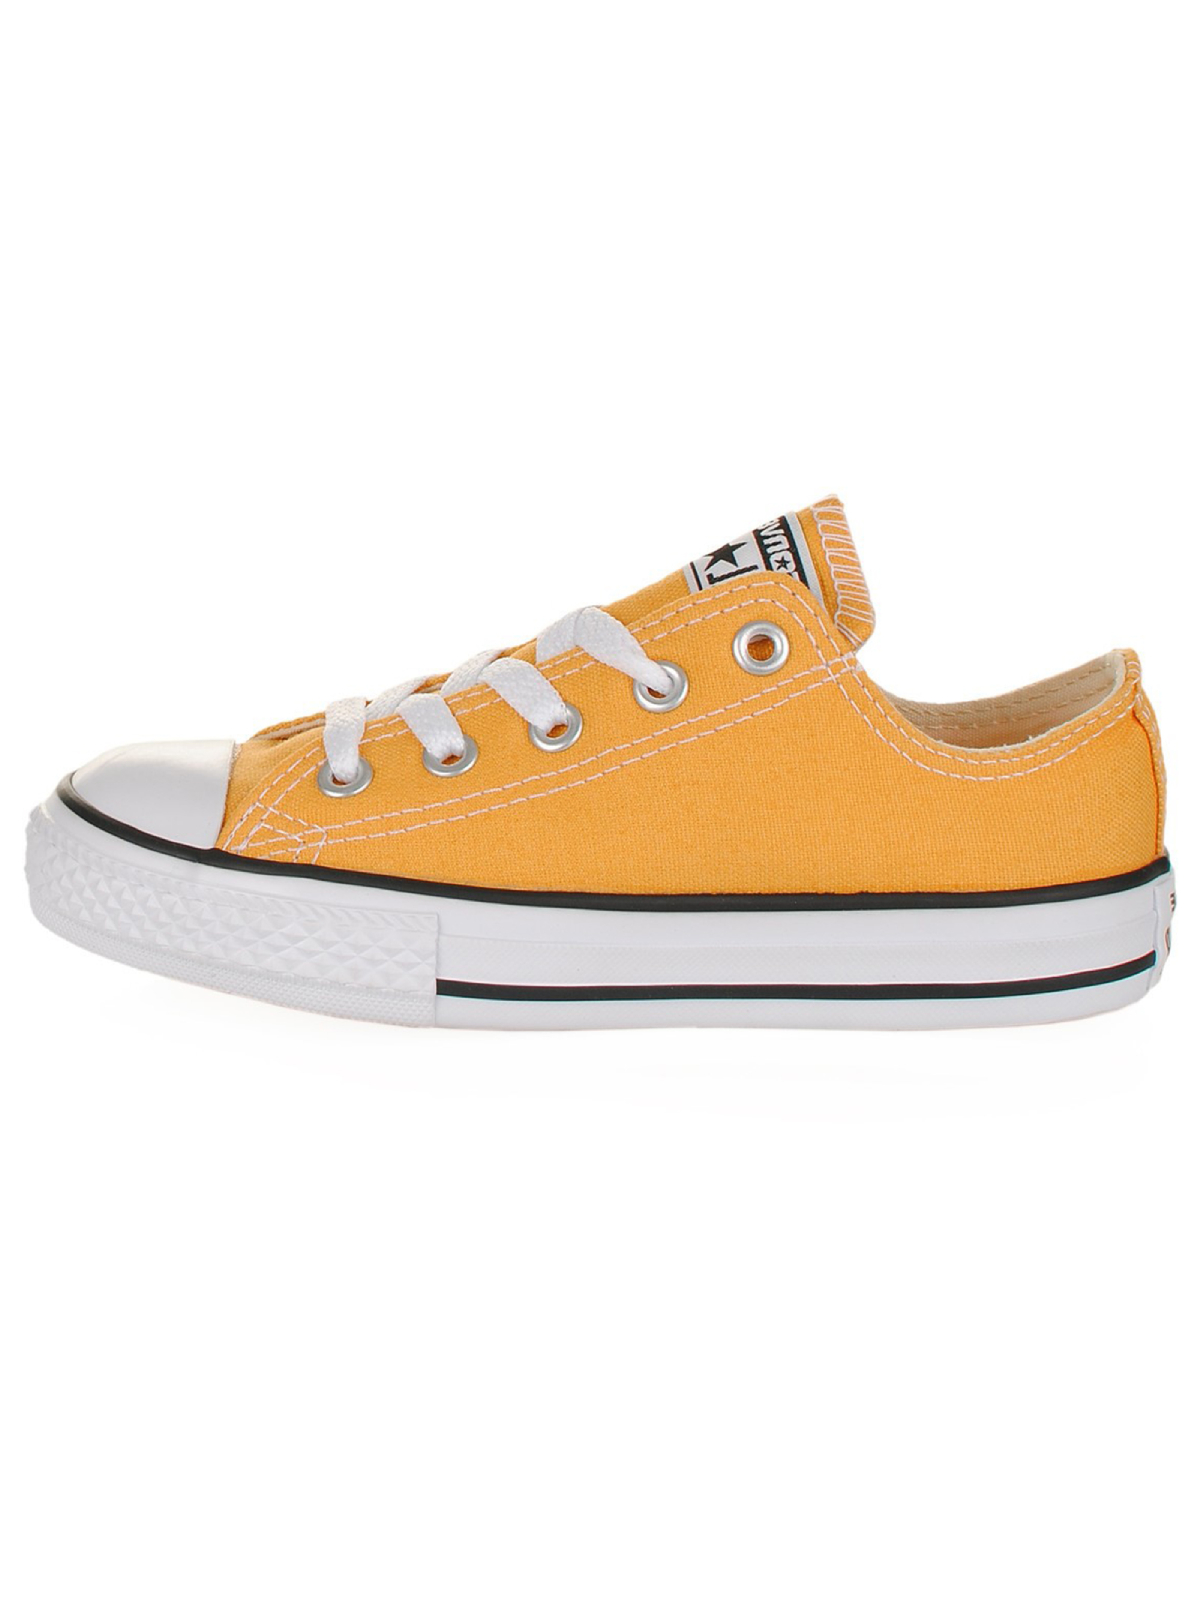   Converse | All Star Chuck Taylor Ox | Kids Shoes